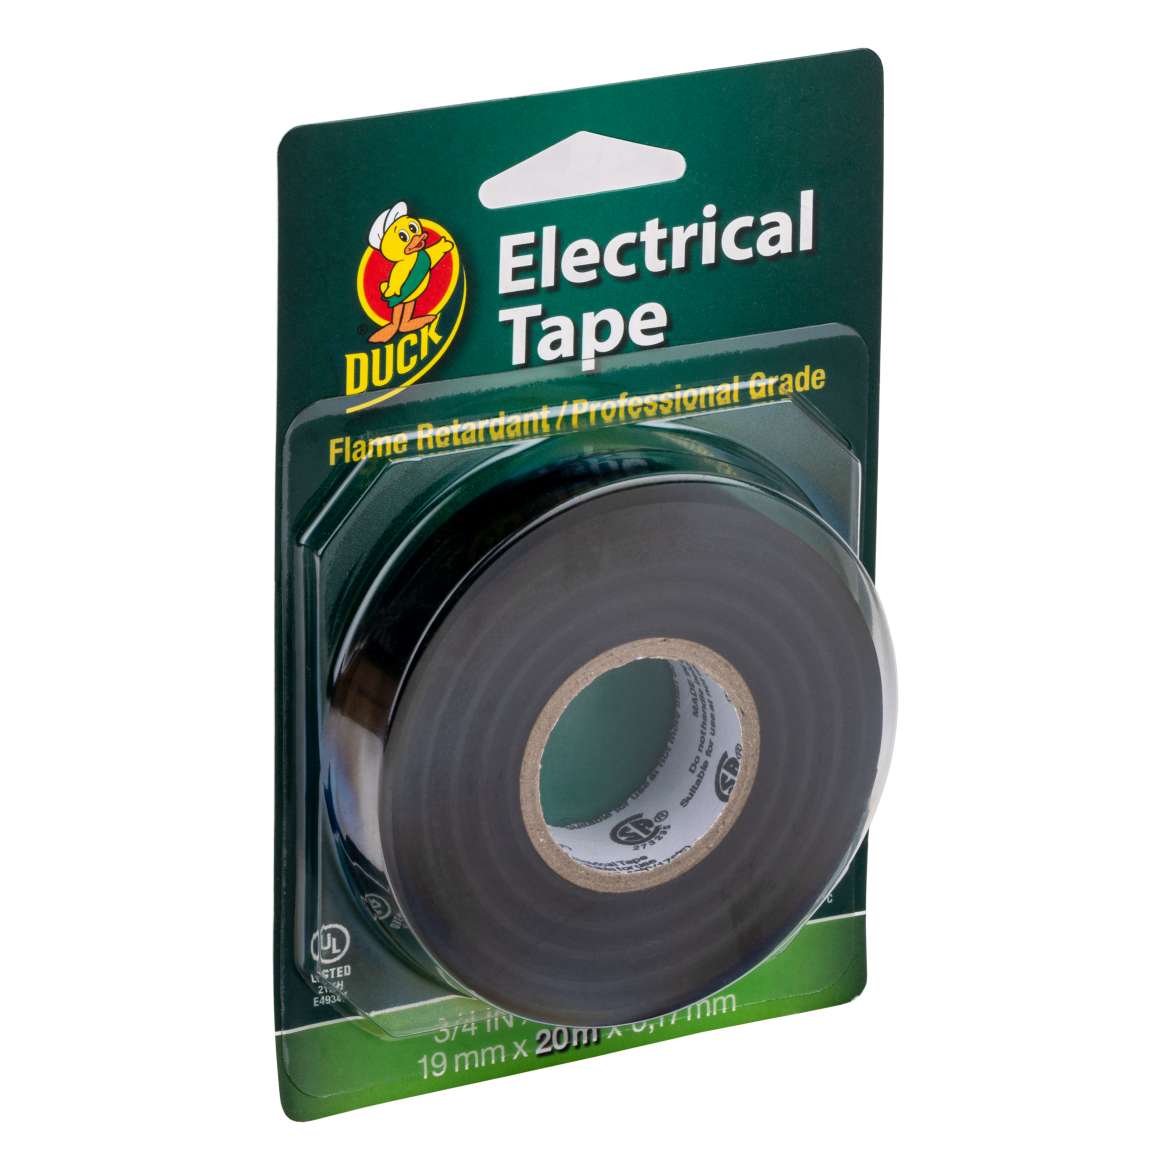 Professional Electrical Tape Image